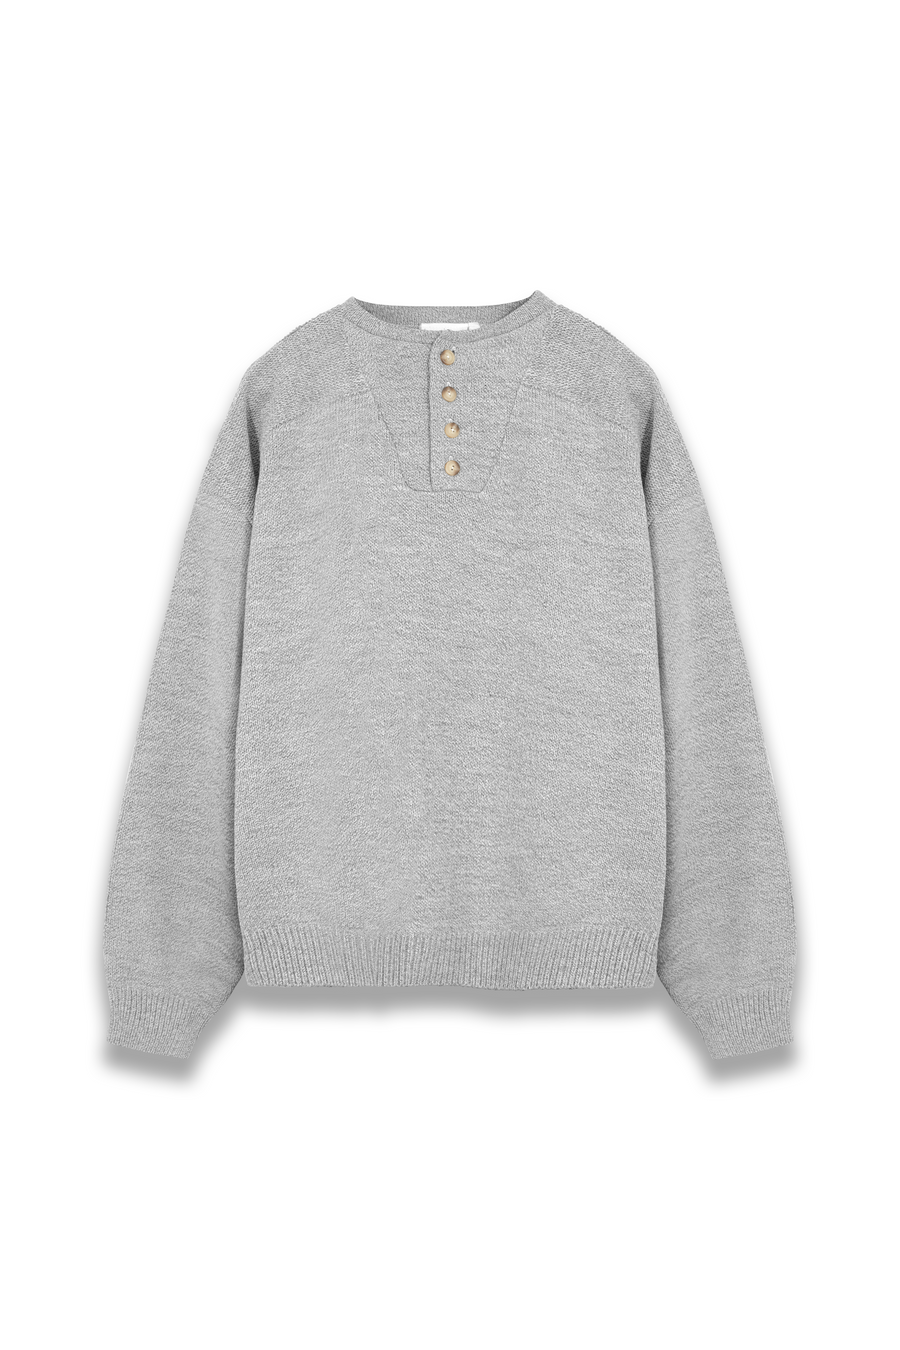 HARRIES Button Knit Sweater